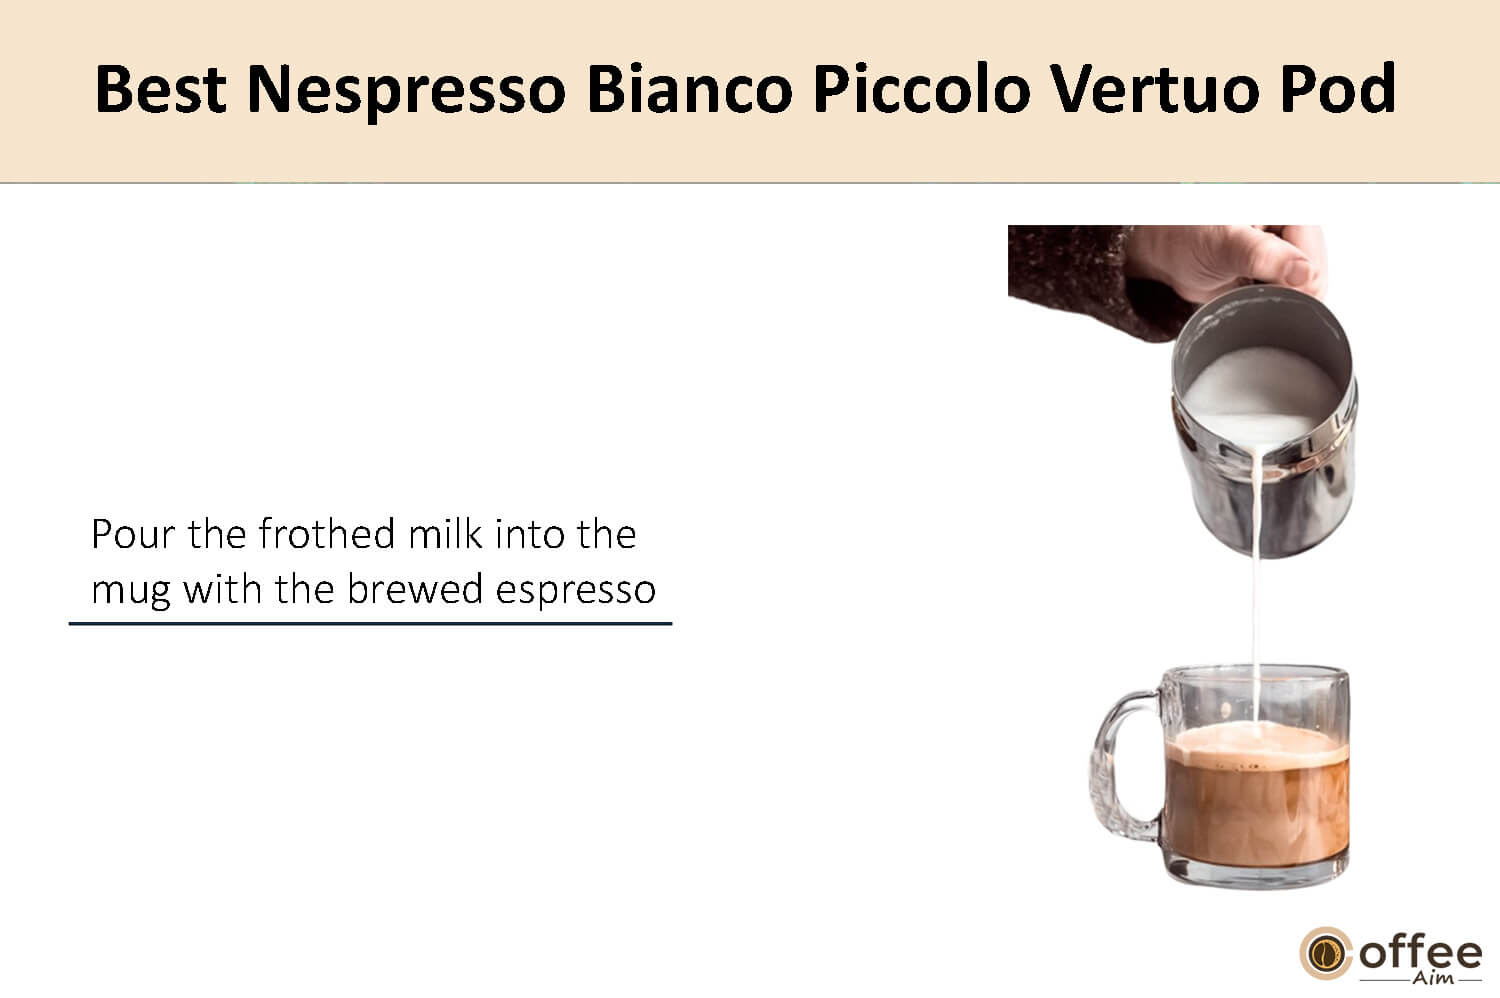 In this image, I elucidate the preparation instructions for crafting the finest Nespresso Bianco Piccolo Vertuo coffee pod.